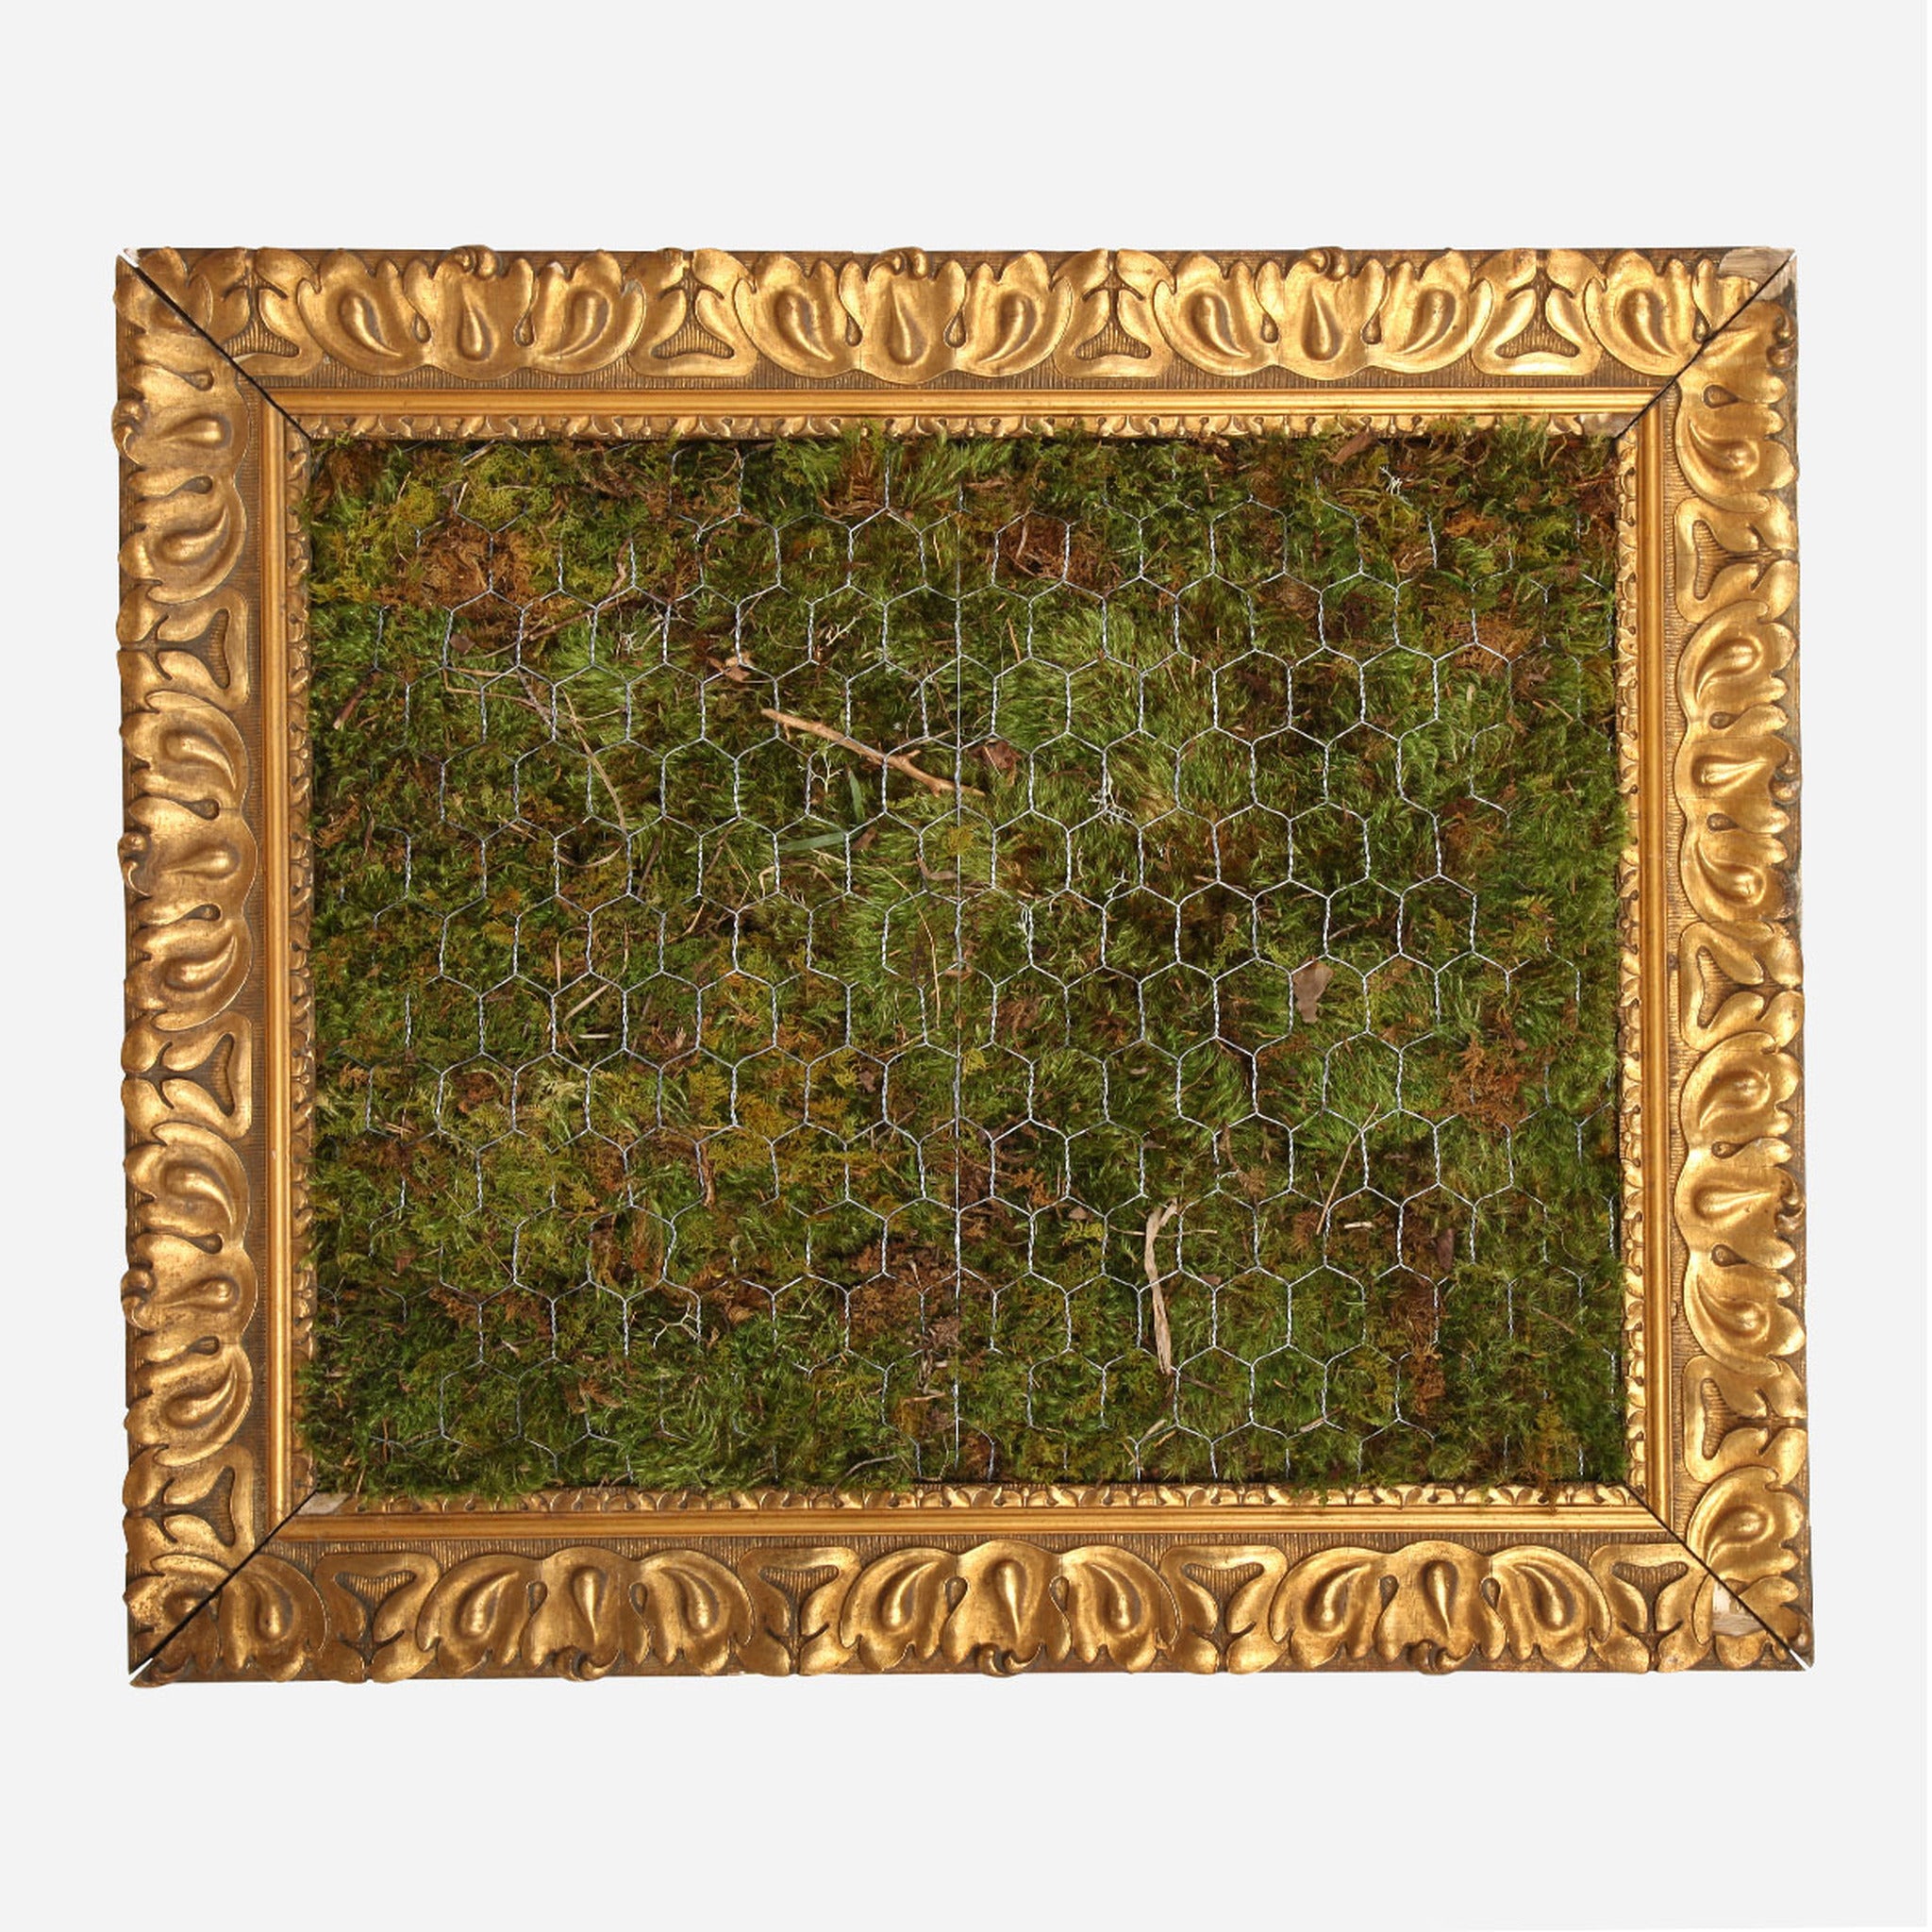 Living Wall Moss Frame by Bobo Intriguing Objects